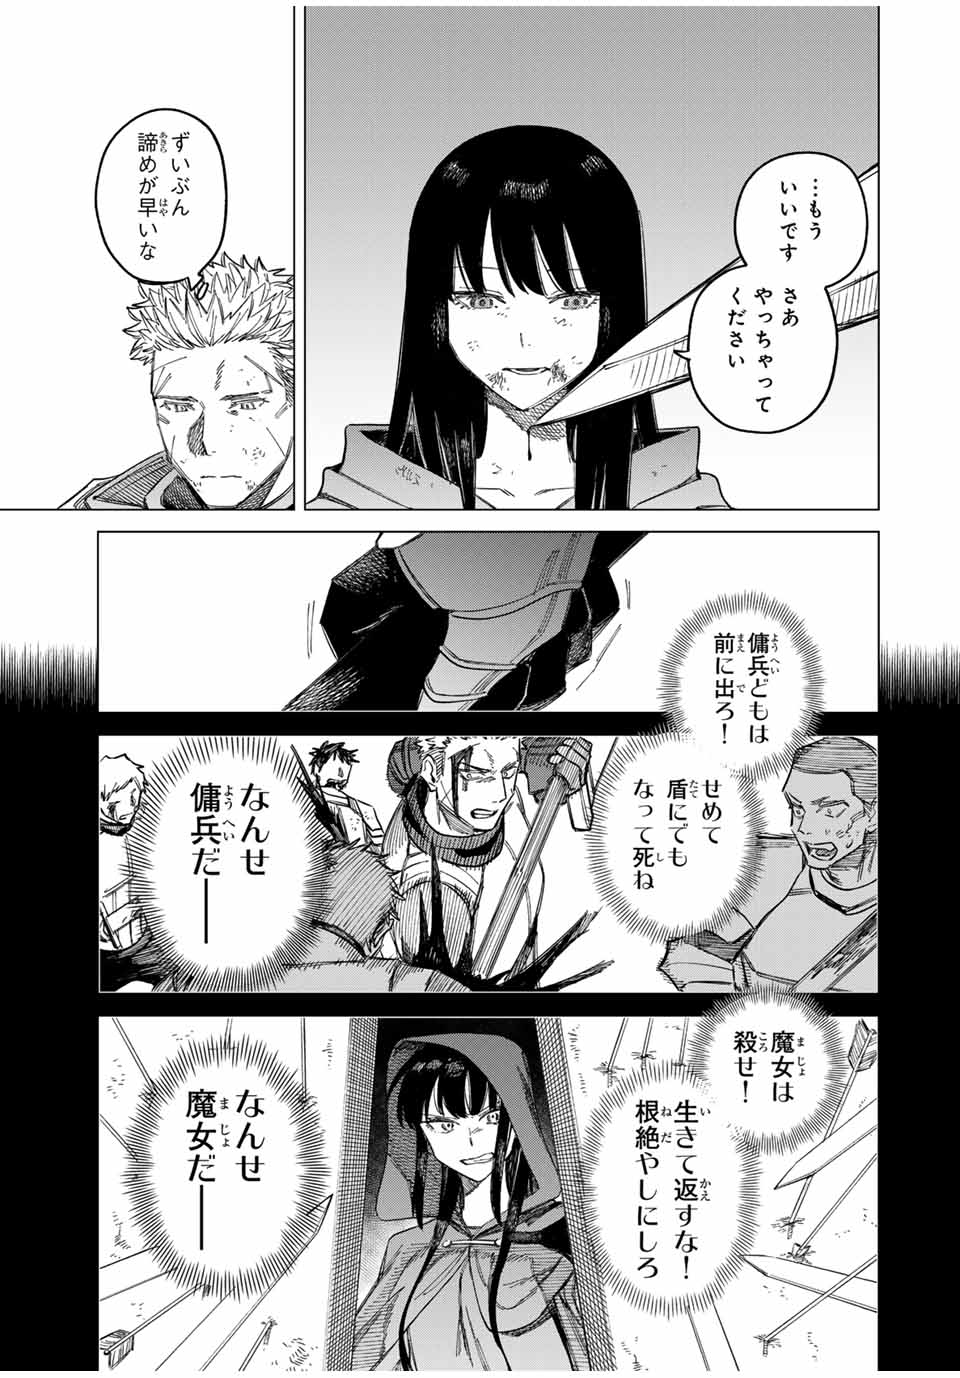 Witch and Mercenary 魔女と傭兵 第1.2話 - Page 23